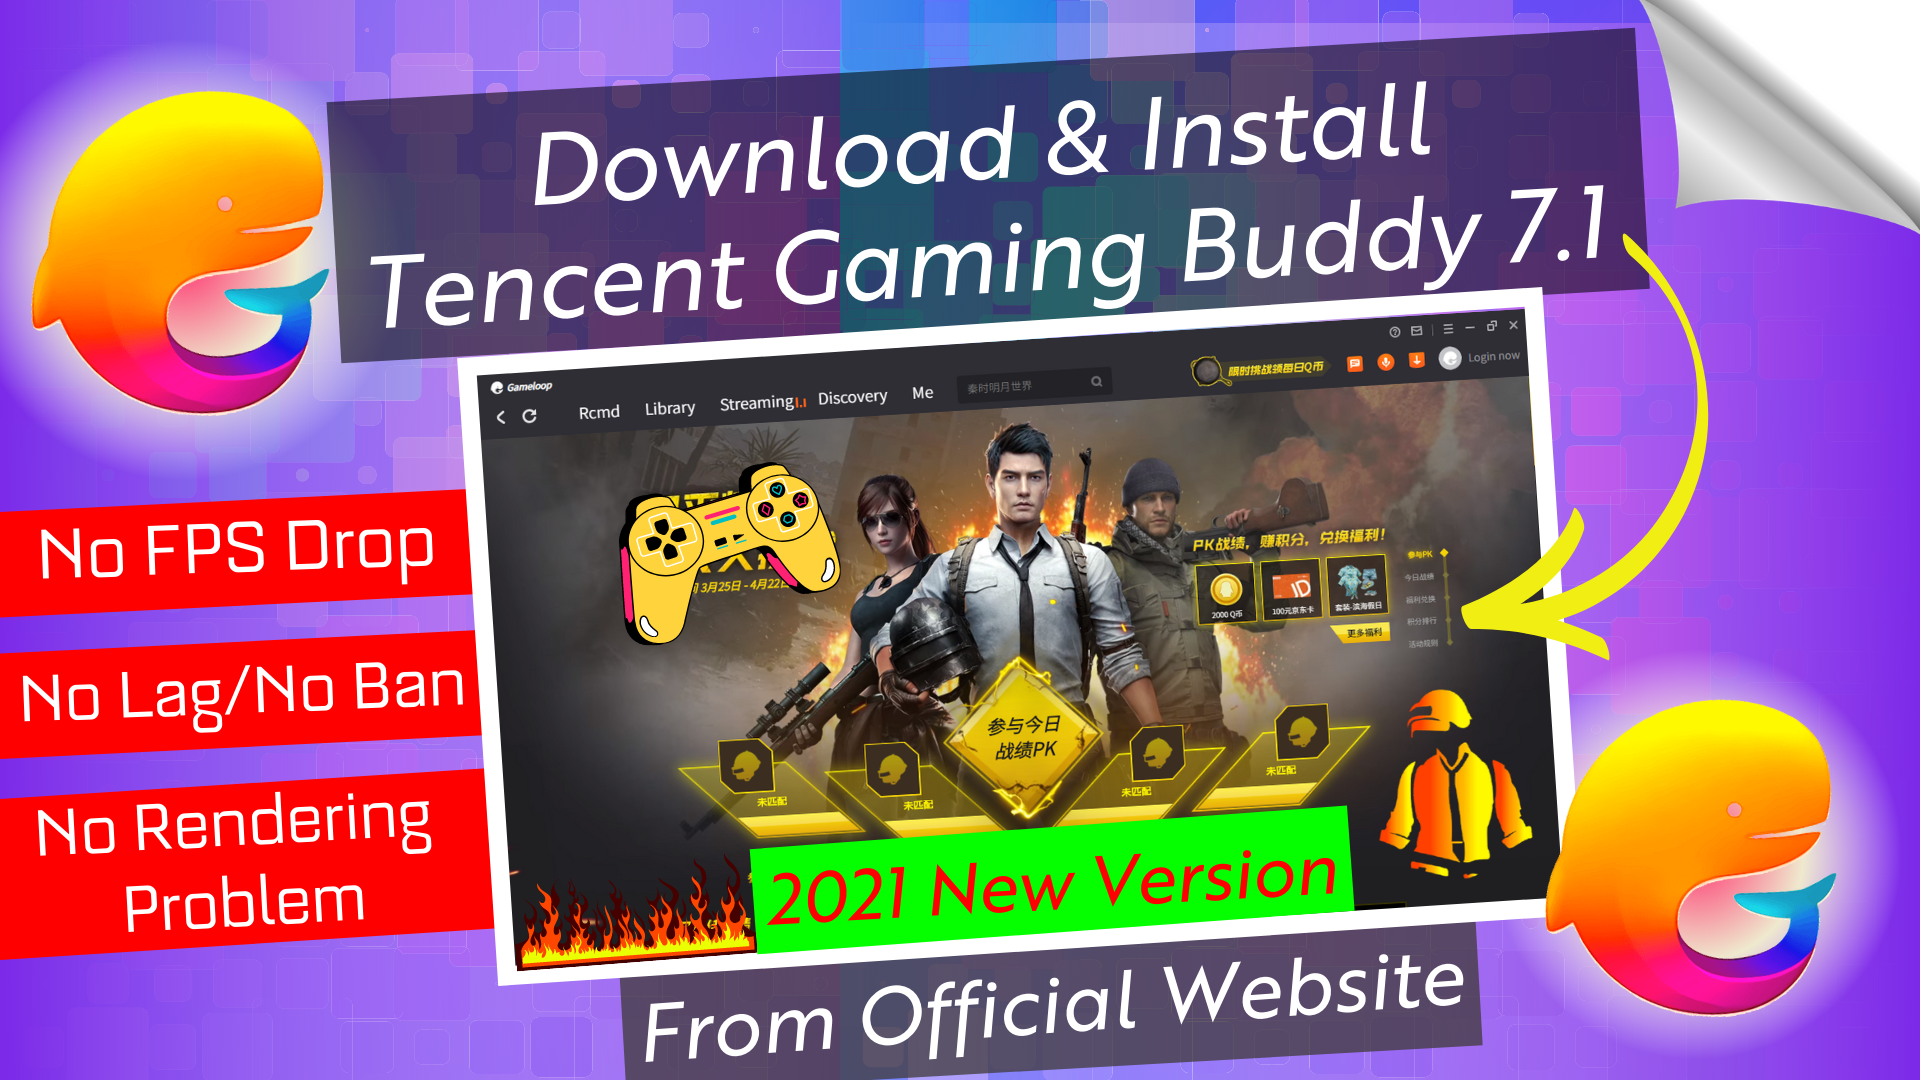 Tencent gaming buddy tencent best emulator for pubg mobile фото 91